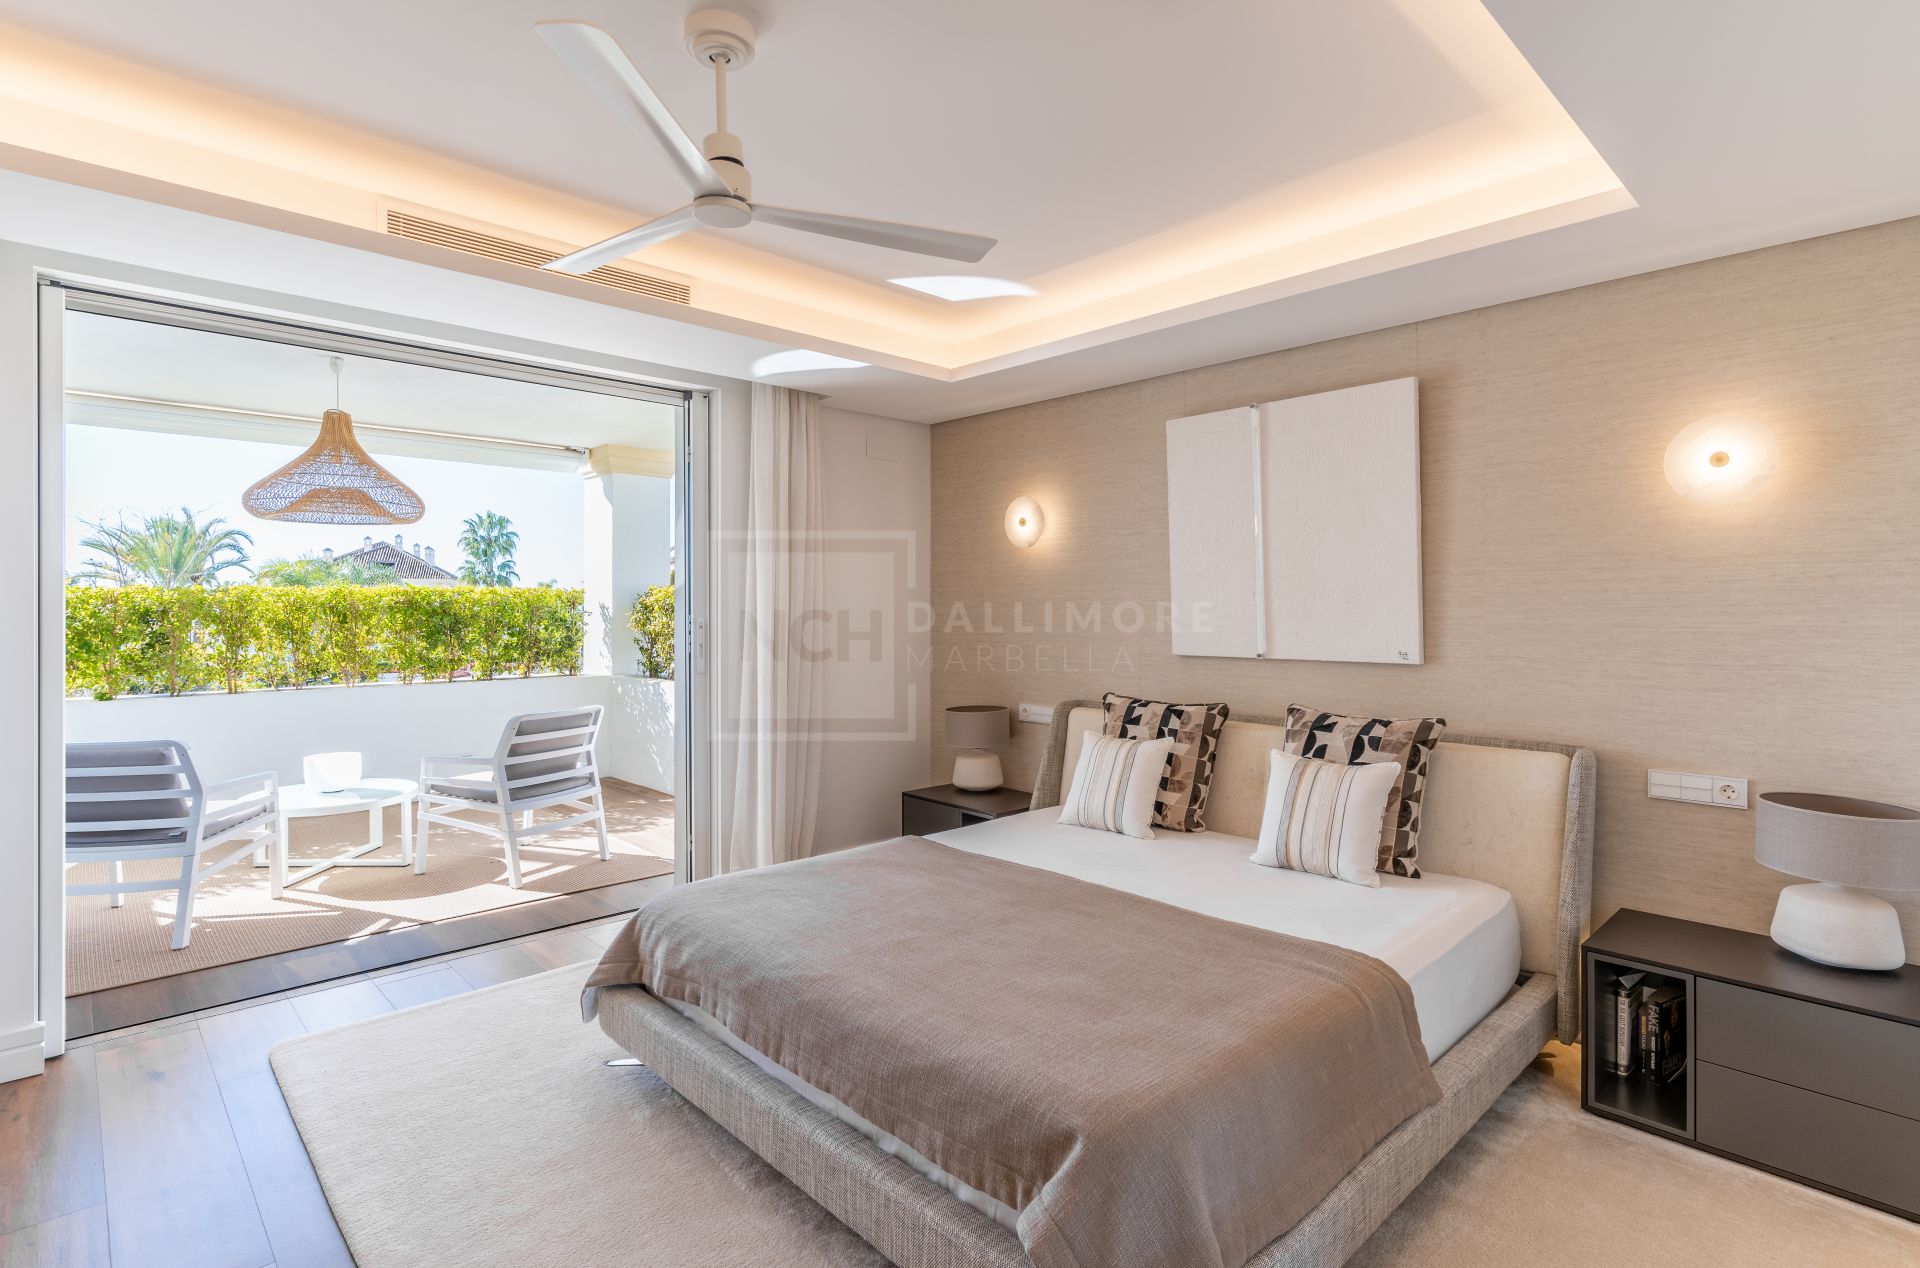 STUNNING LUXURY APARTMENT LOCATED ON THE GOLDEN MILE